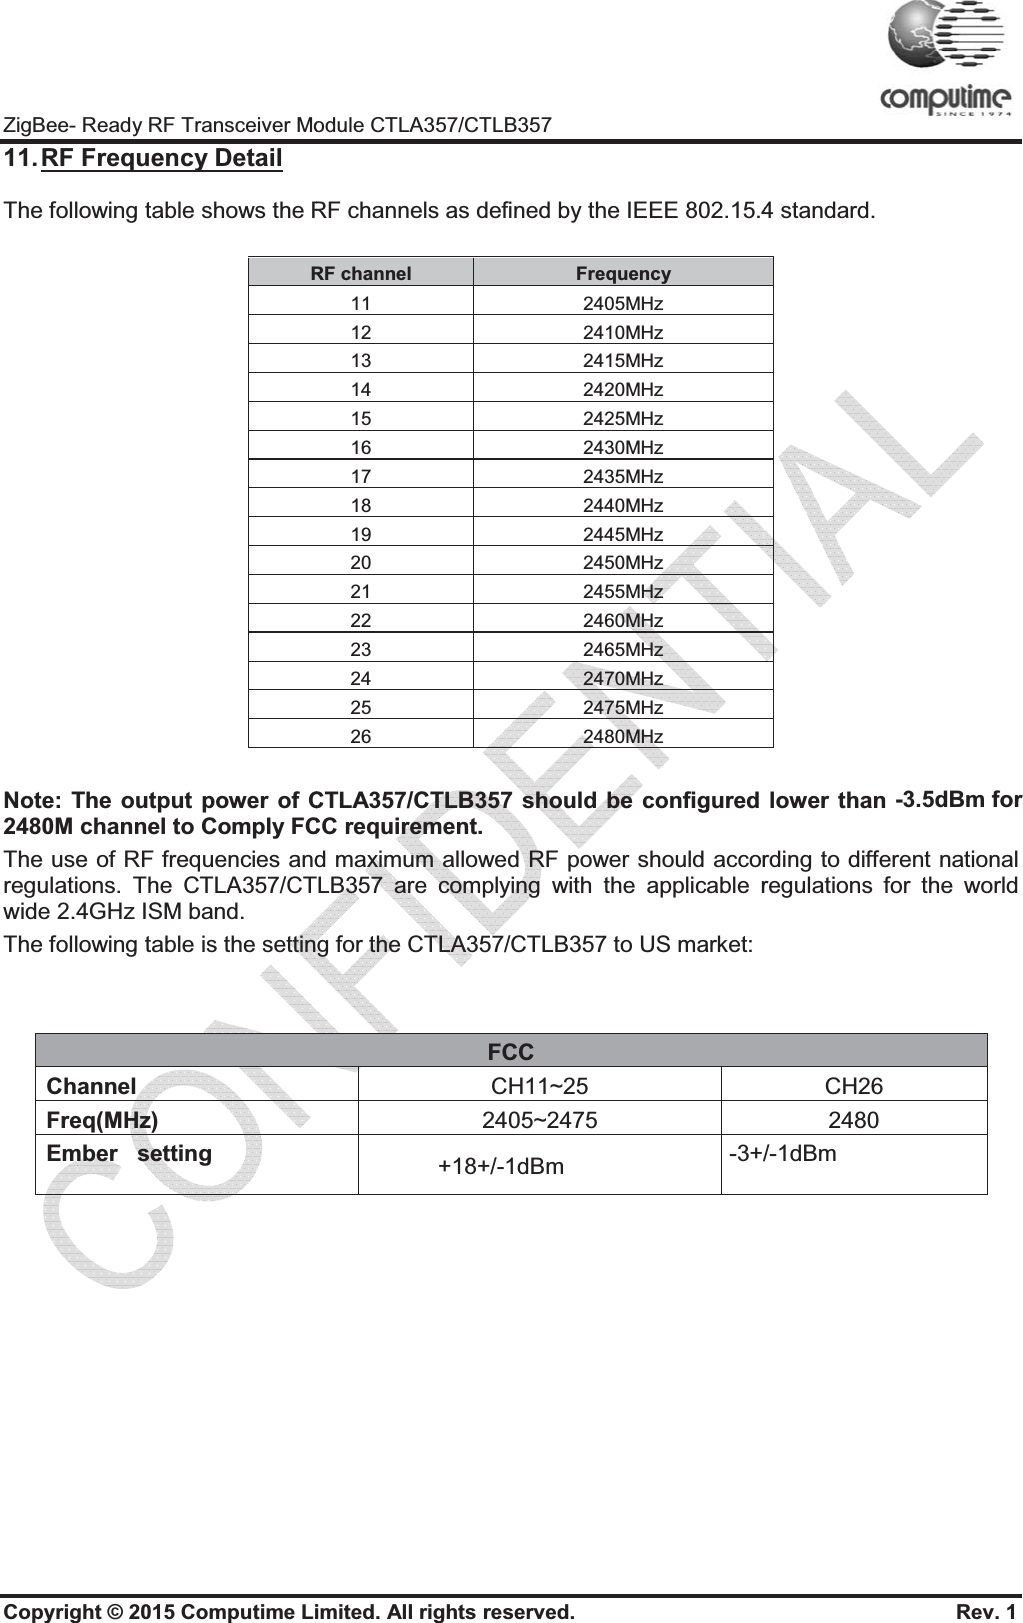 ZigBee- Ready RF Transceiver MoCopyright © 2015 Computime Li11. RF Frequency DetailThe following table shows the RRNote: The output power of C2480M channel to Comply FCThe use of RF frequencies andregulations. The CTLA357/CTwide 2.4GHz ISM band. The following table is the settinChannel Freq(MHz) Ember   setting odule CTLA357/CTLB357 imited. All rights reserved.                     RF channels as defined by the IEEE 802.15.4RF channel Frequency 11 2405MHz 12 2410MHz 13 2415MHz 14 2420MHz 15 2425MHz 16 2430MHz 17 2435MHz 18 2440MHz 19 2445MHz 20 2450MHz 21 2455MHz 22 2460MHz 23 2465MHz 24 2470MHz 25 2475MHz 26 2480MHz CTLA357/CTLB357 should be configured CC requirement.d maximum allowed RF power should accorTLB357 are complying with the applicable rg for the CTLA357/CTLB357 to US market:FCC CH11~25 2405~2475-4dBm +Non boost -24te                                 Rev. 1 4 standard.lower than -24dBm for rding to different national regulations for the world CH26 24804dBm  ( base on FCC est result to adjust )-3.5dBm for+18+/-1dBm-3+/-1dBm